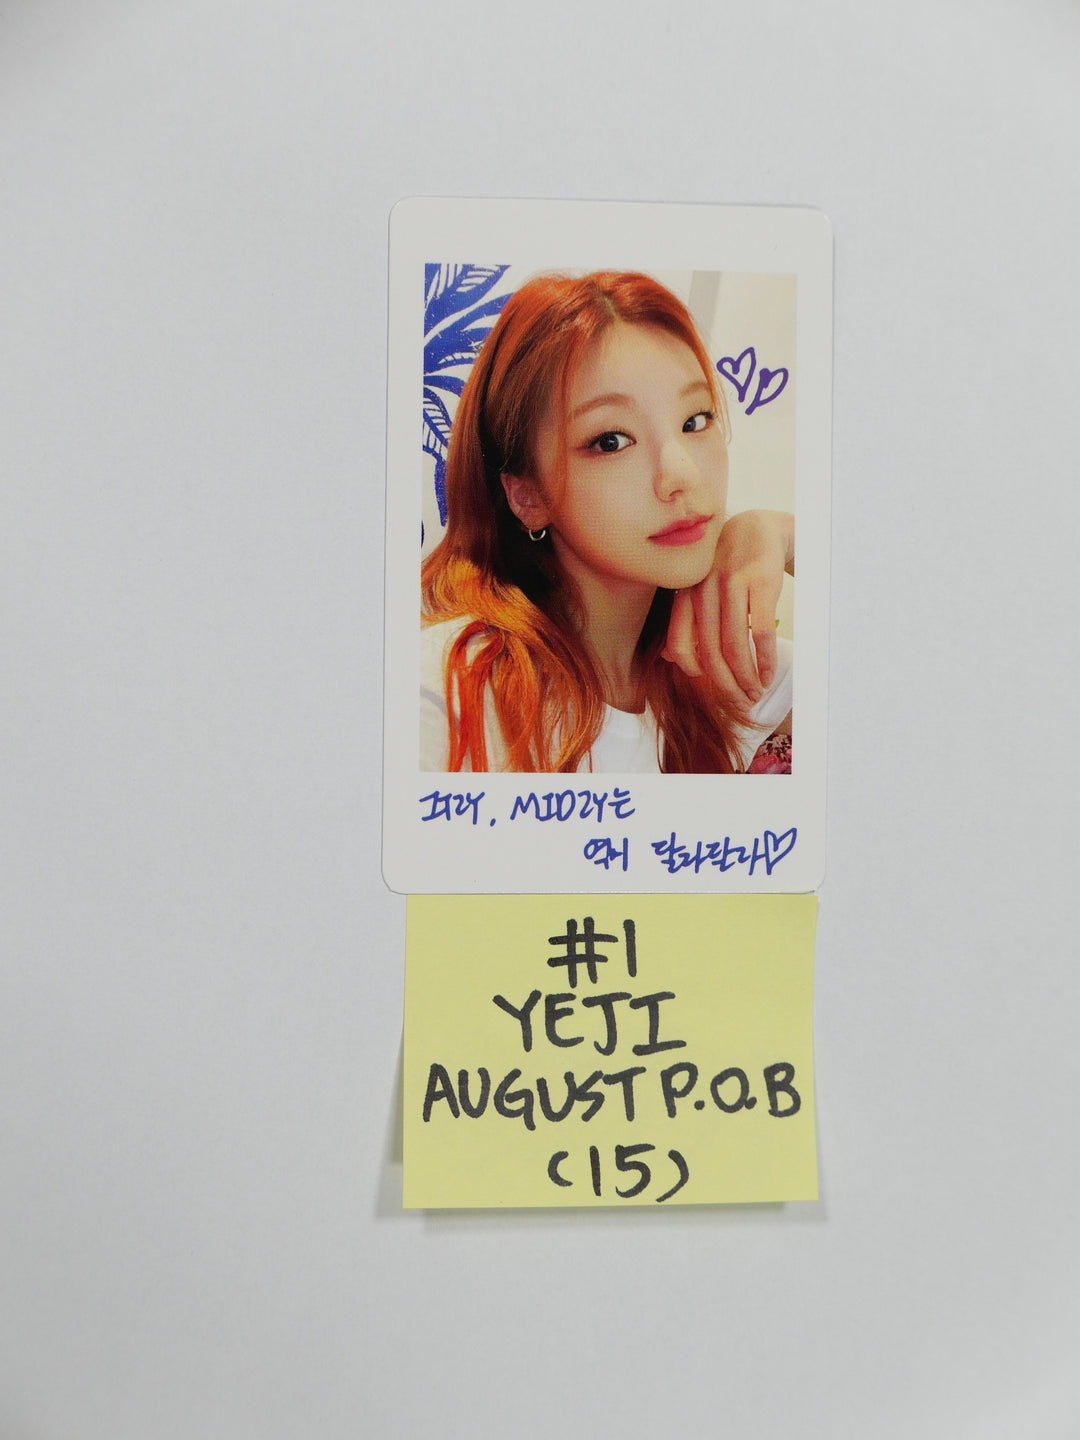 Itzy - No Bad Days- August (My Summer Recipe) - Pre-order Benefit Polaroid Photocard